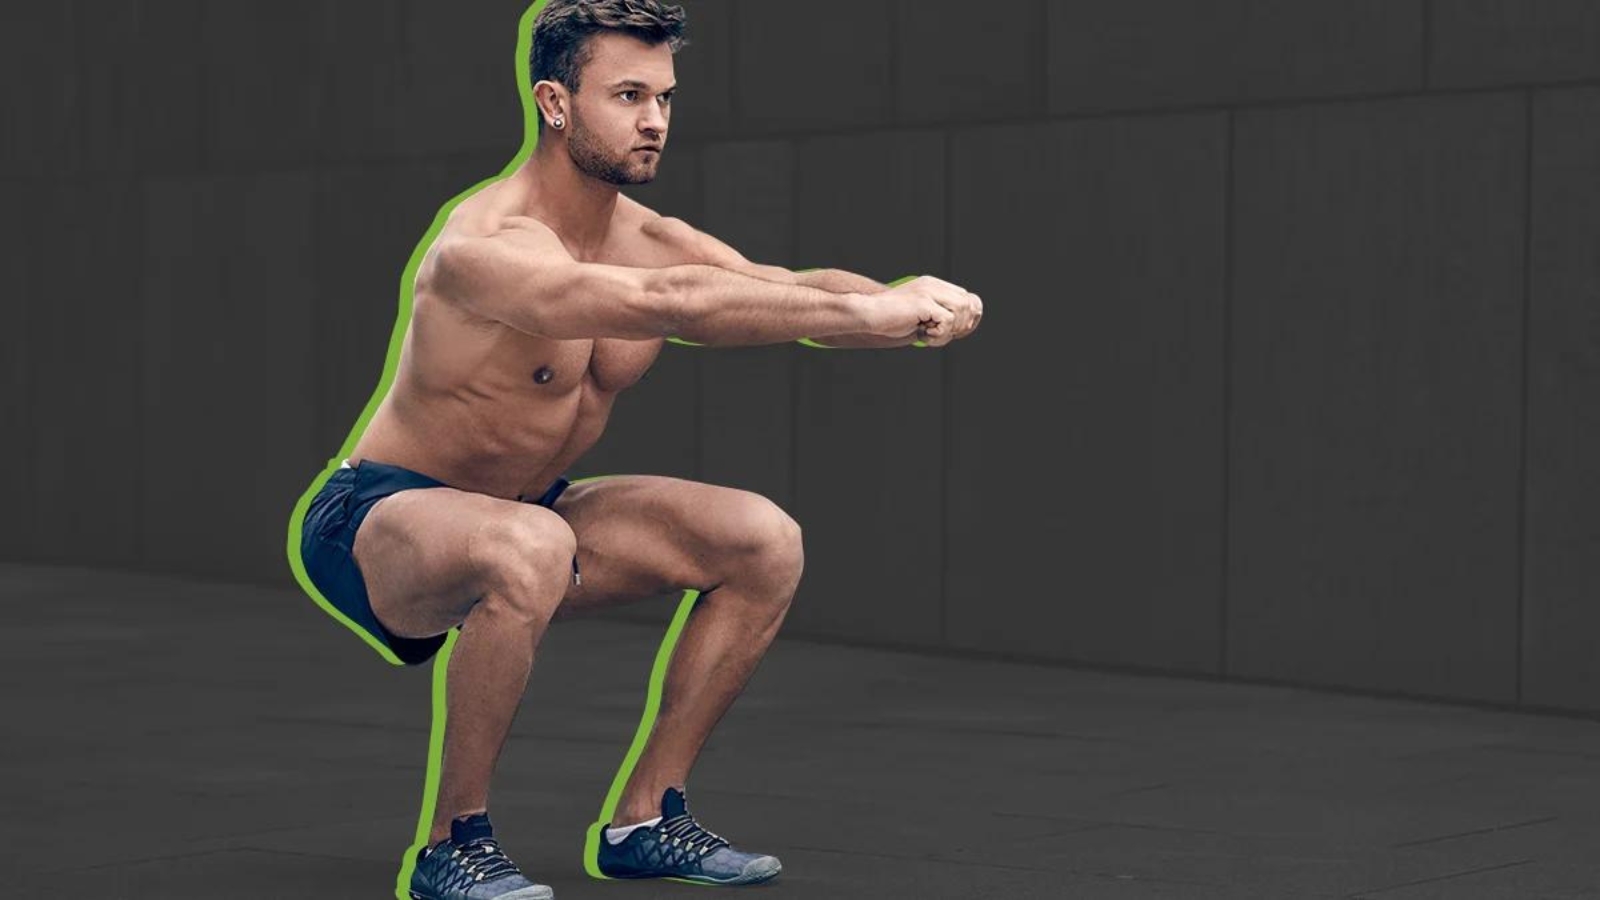 12 Best Bodyweight Exercises for Building Muscle & Losing Fat